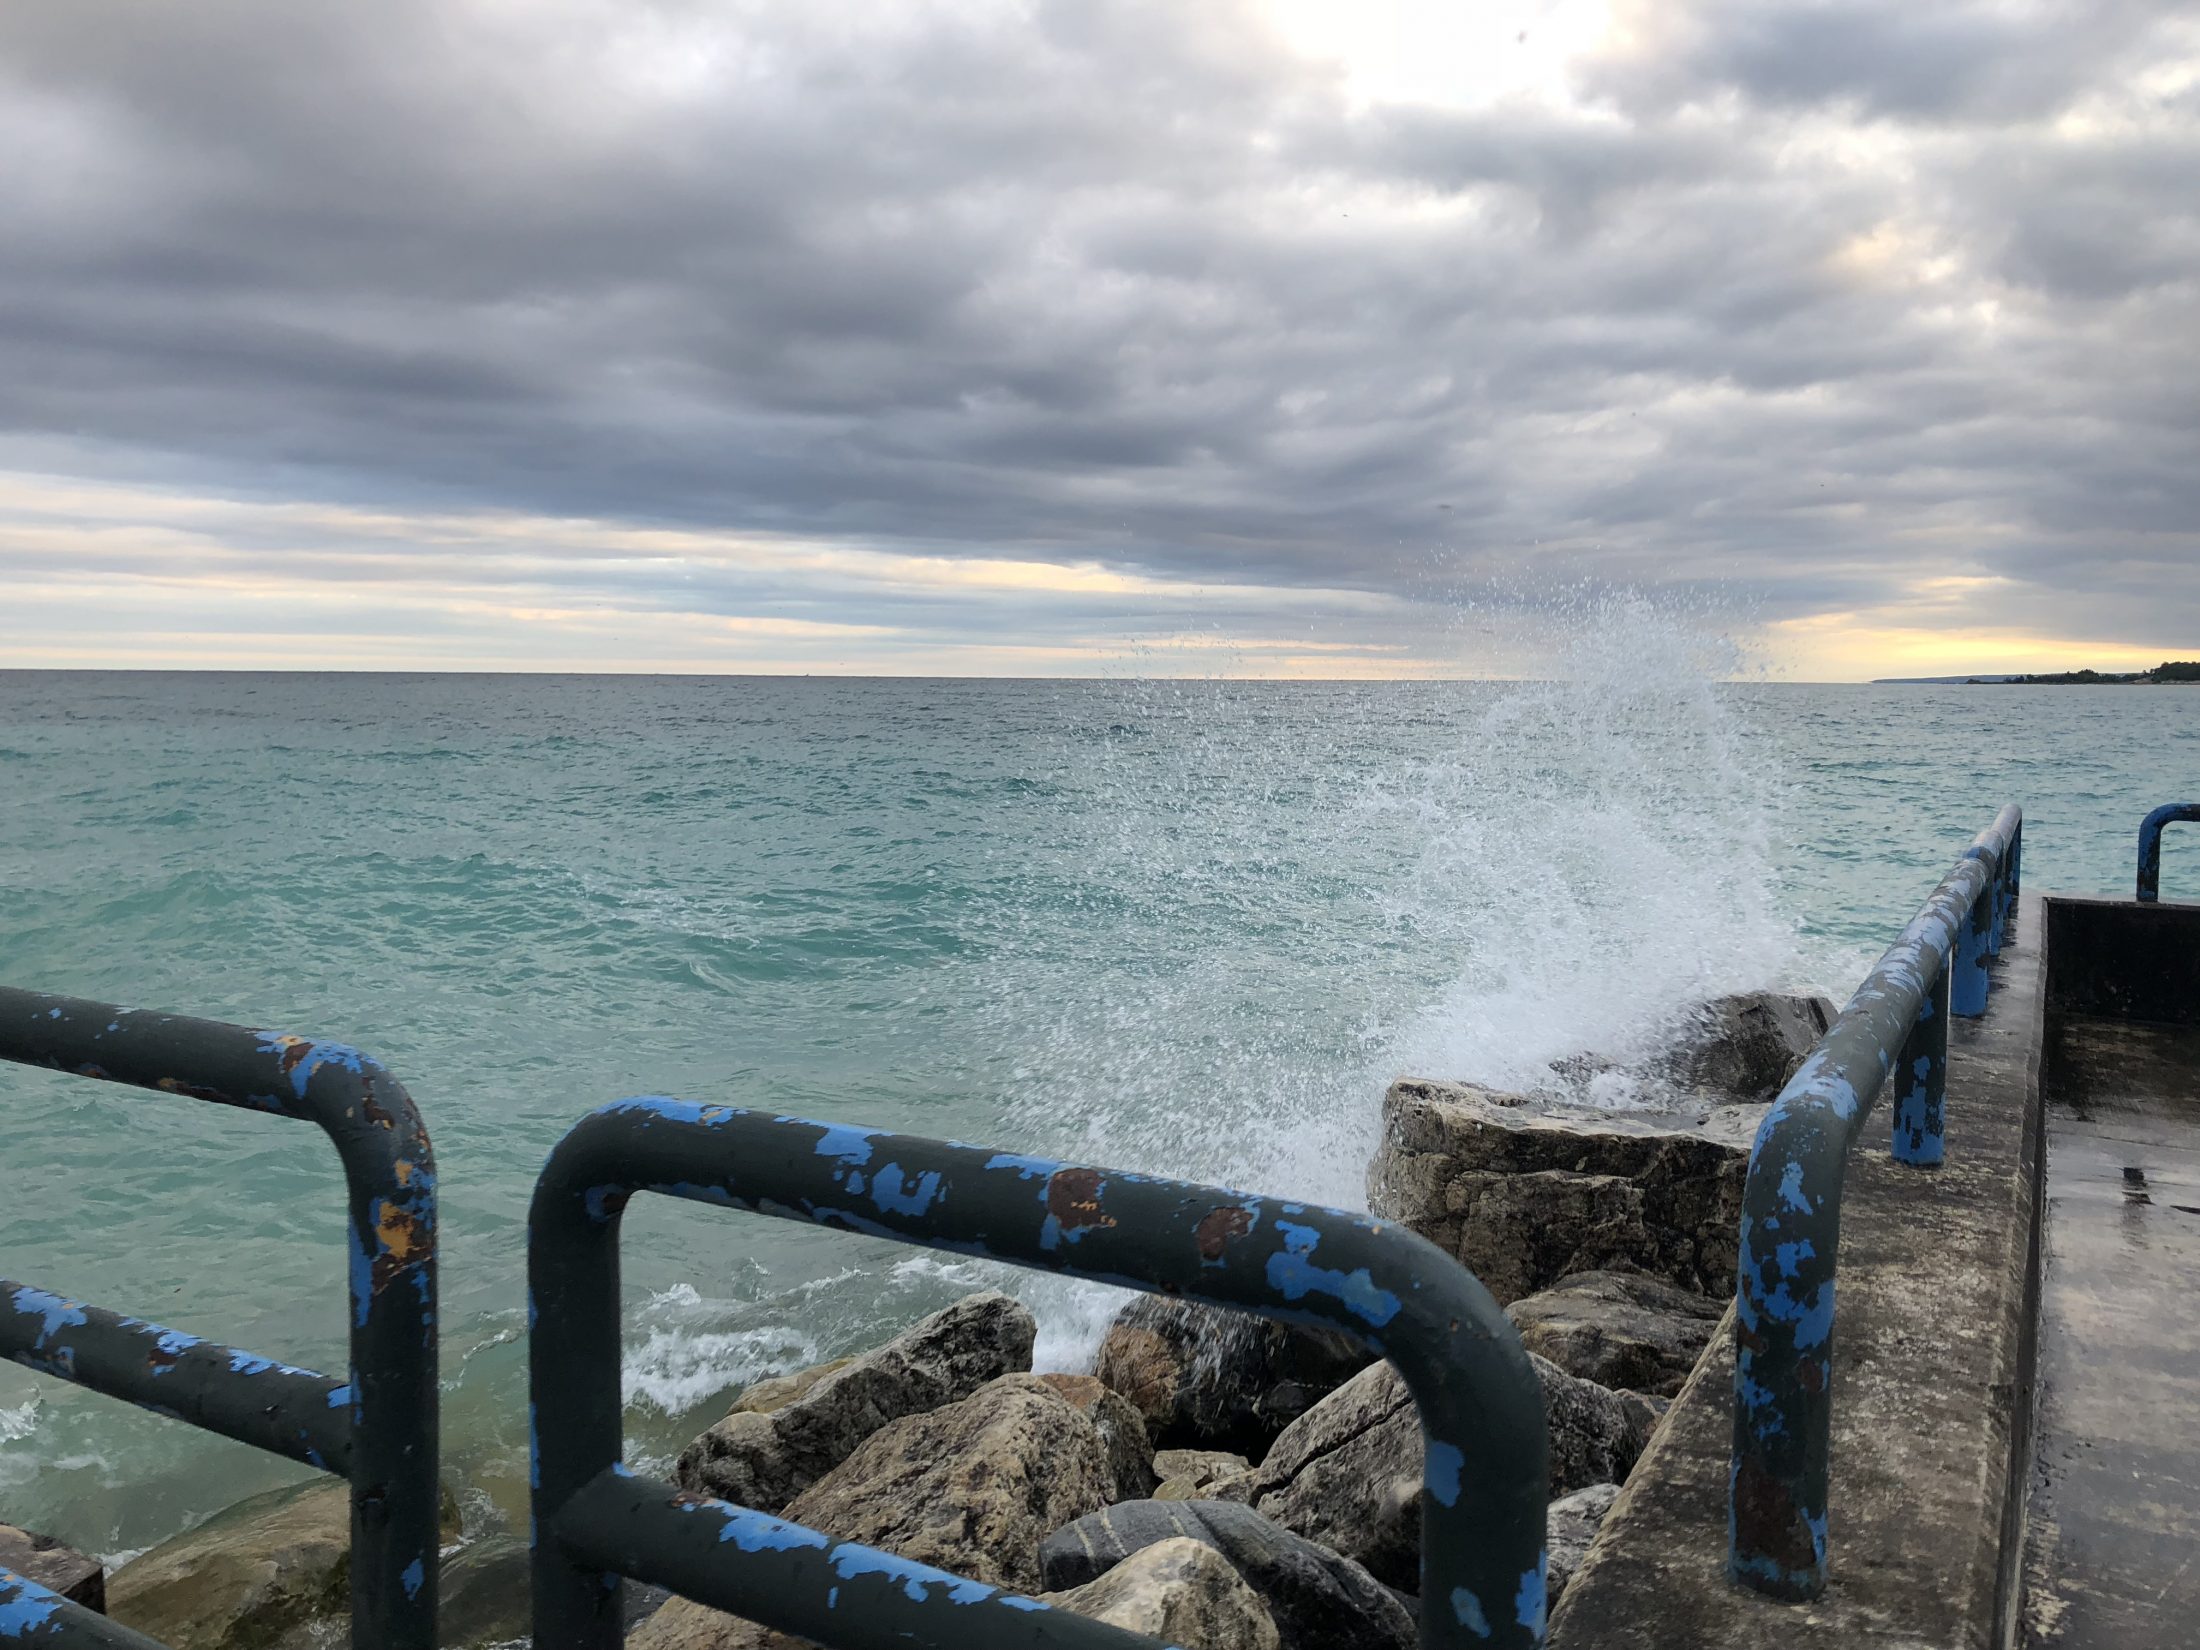 Waves crashing on the pier during Brimley family vacation